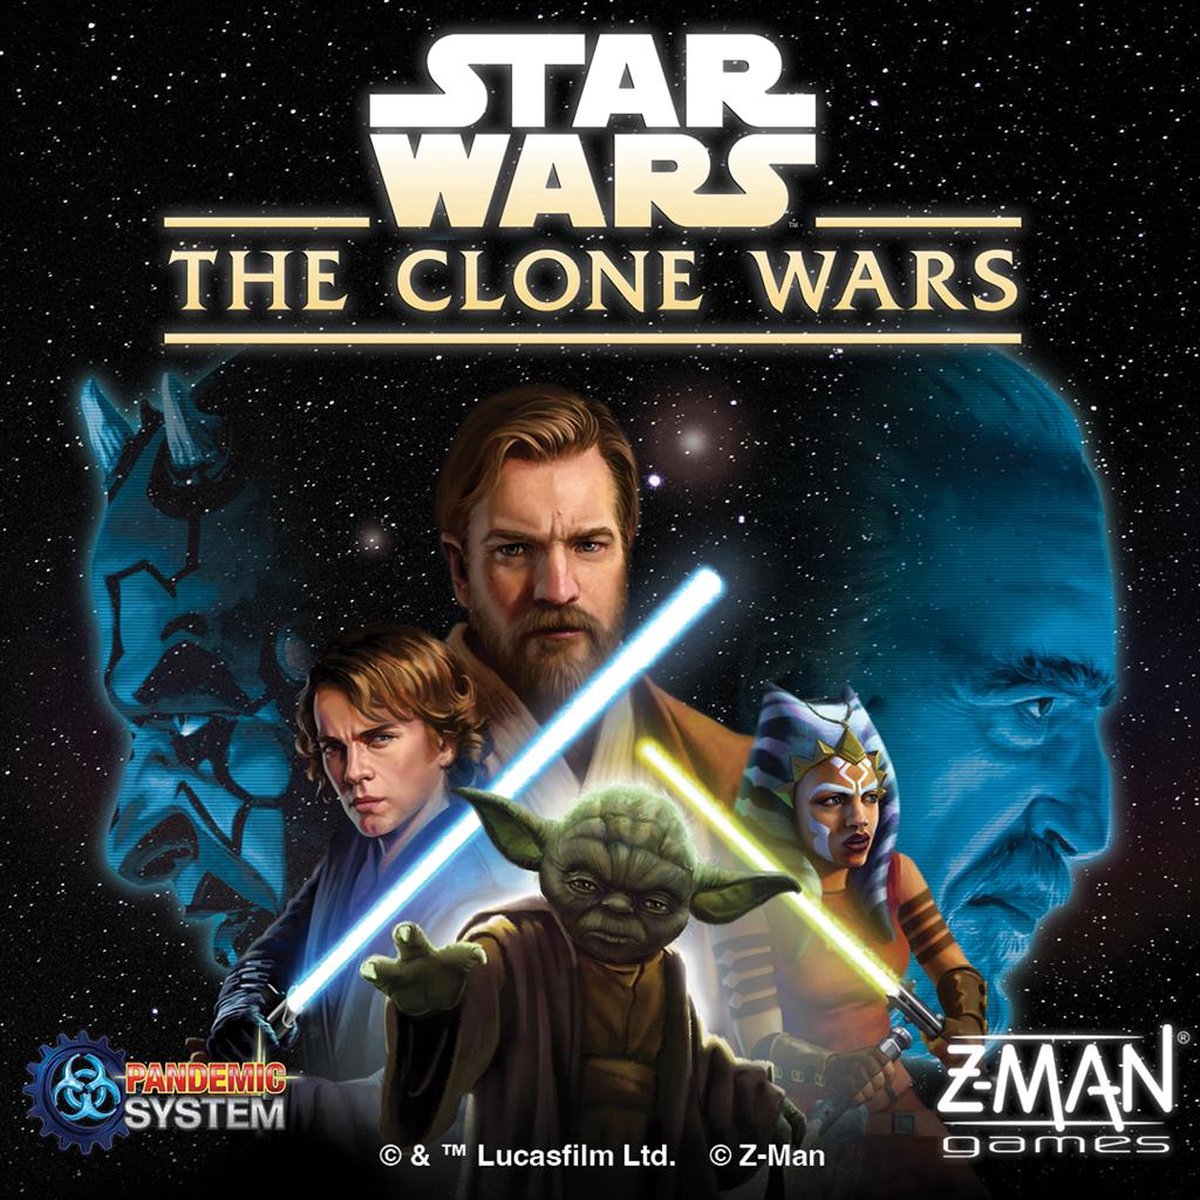 Star Wars: The Clone Wars - A Pandemic System Game - Engelstalig